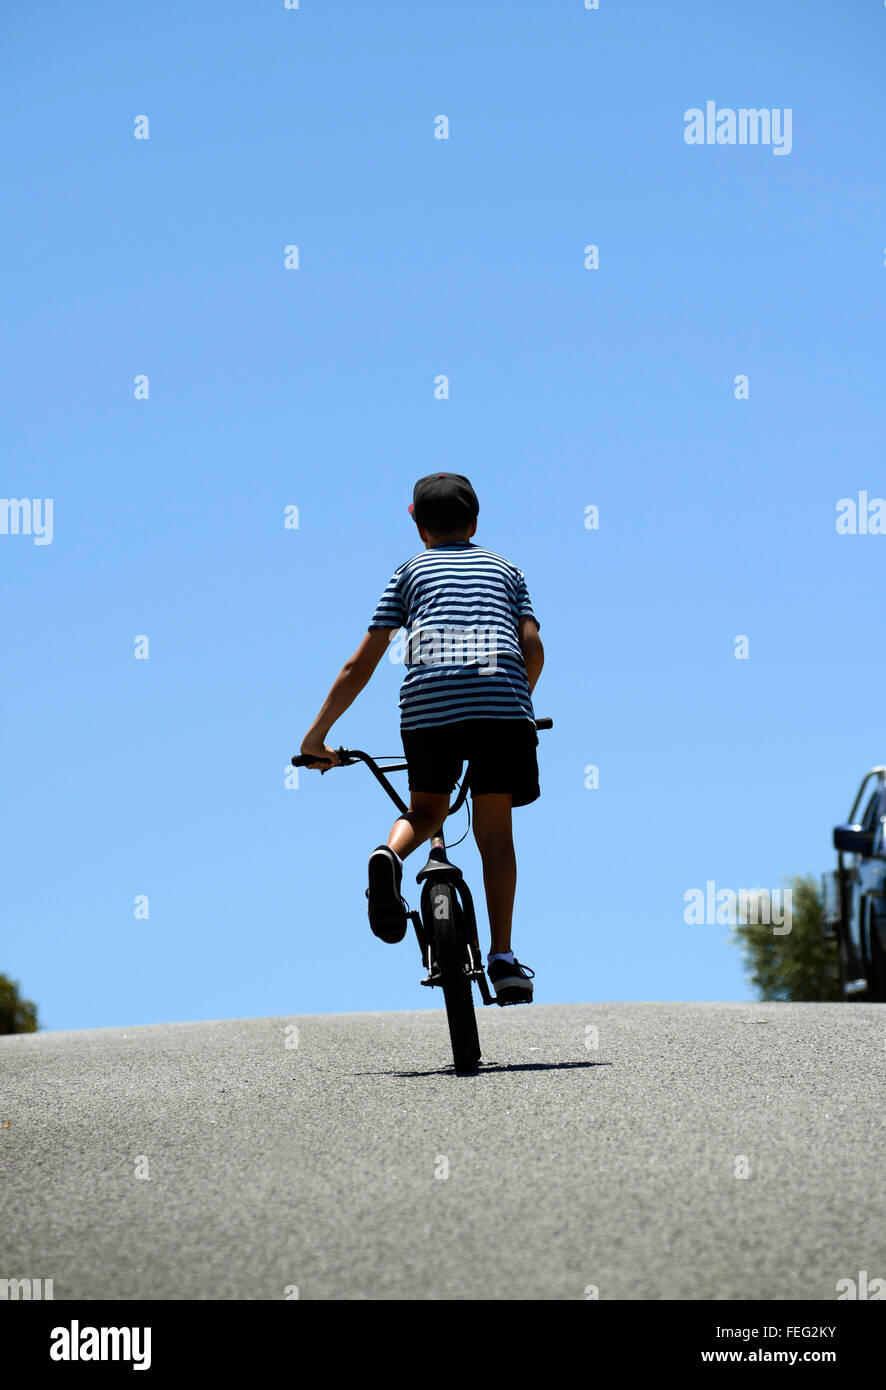 Boy with back to camera rides his BMX bicycle up a hill, almost silhouetted against a blue sky Stock Photo